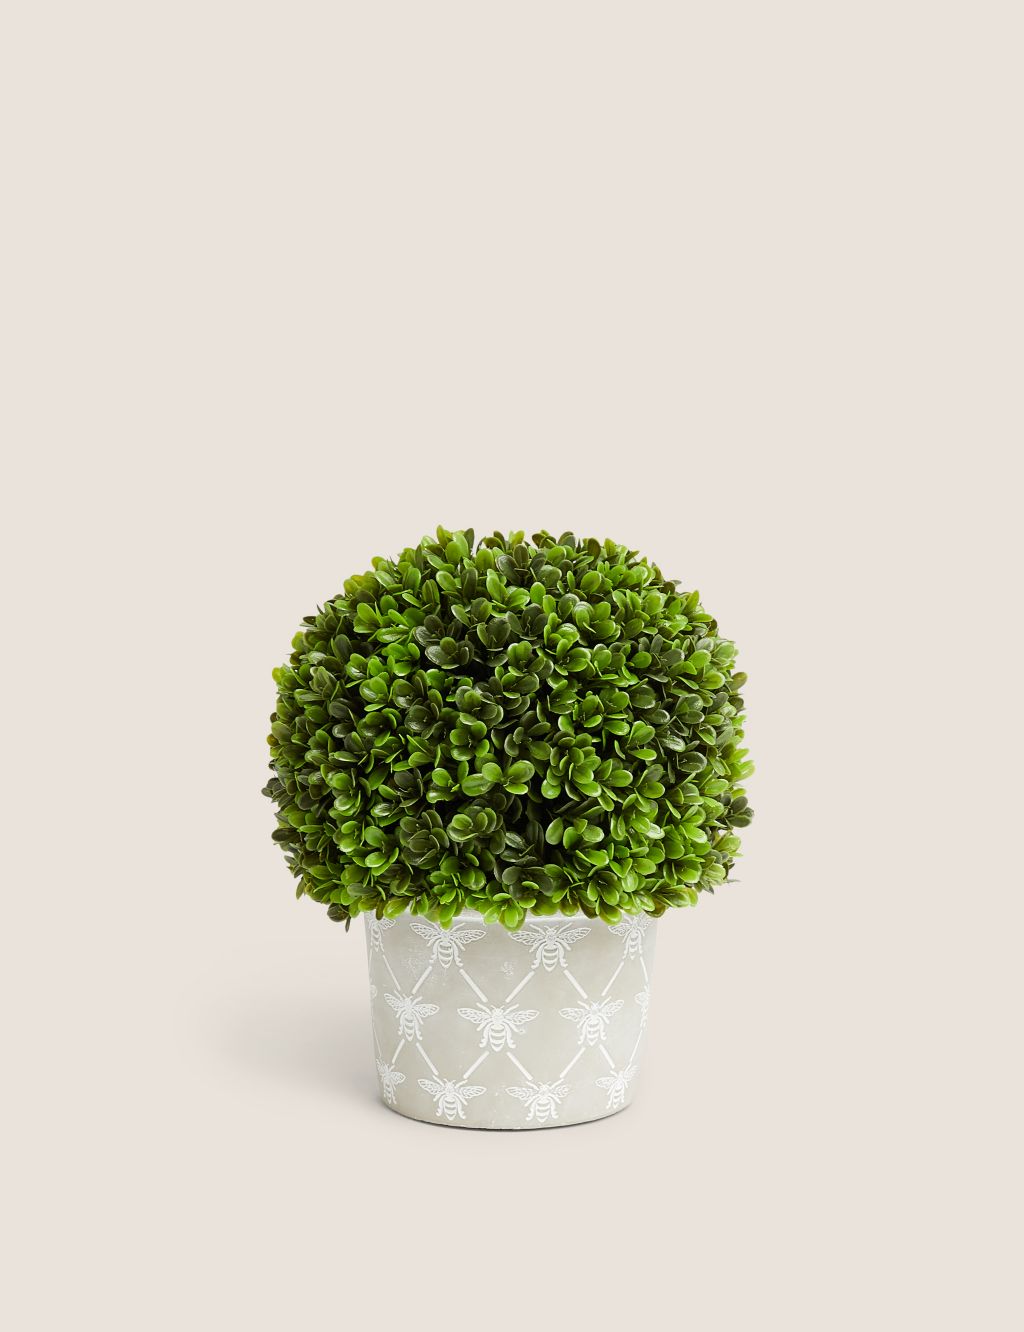 Artificial Topiary Ball in Pot image 1